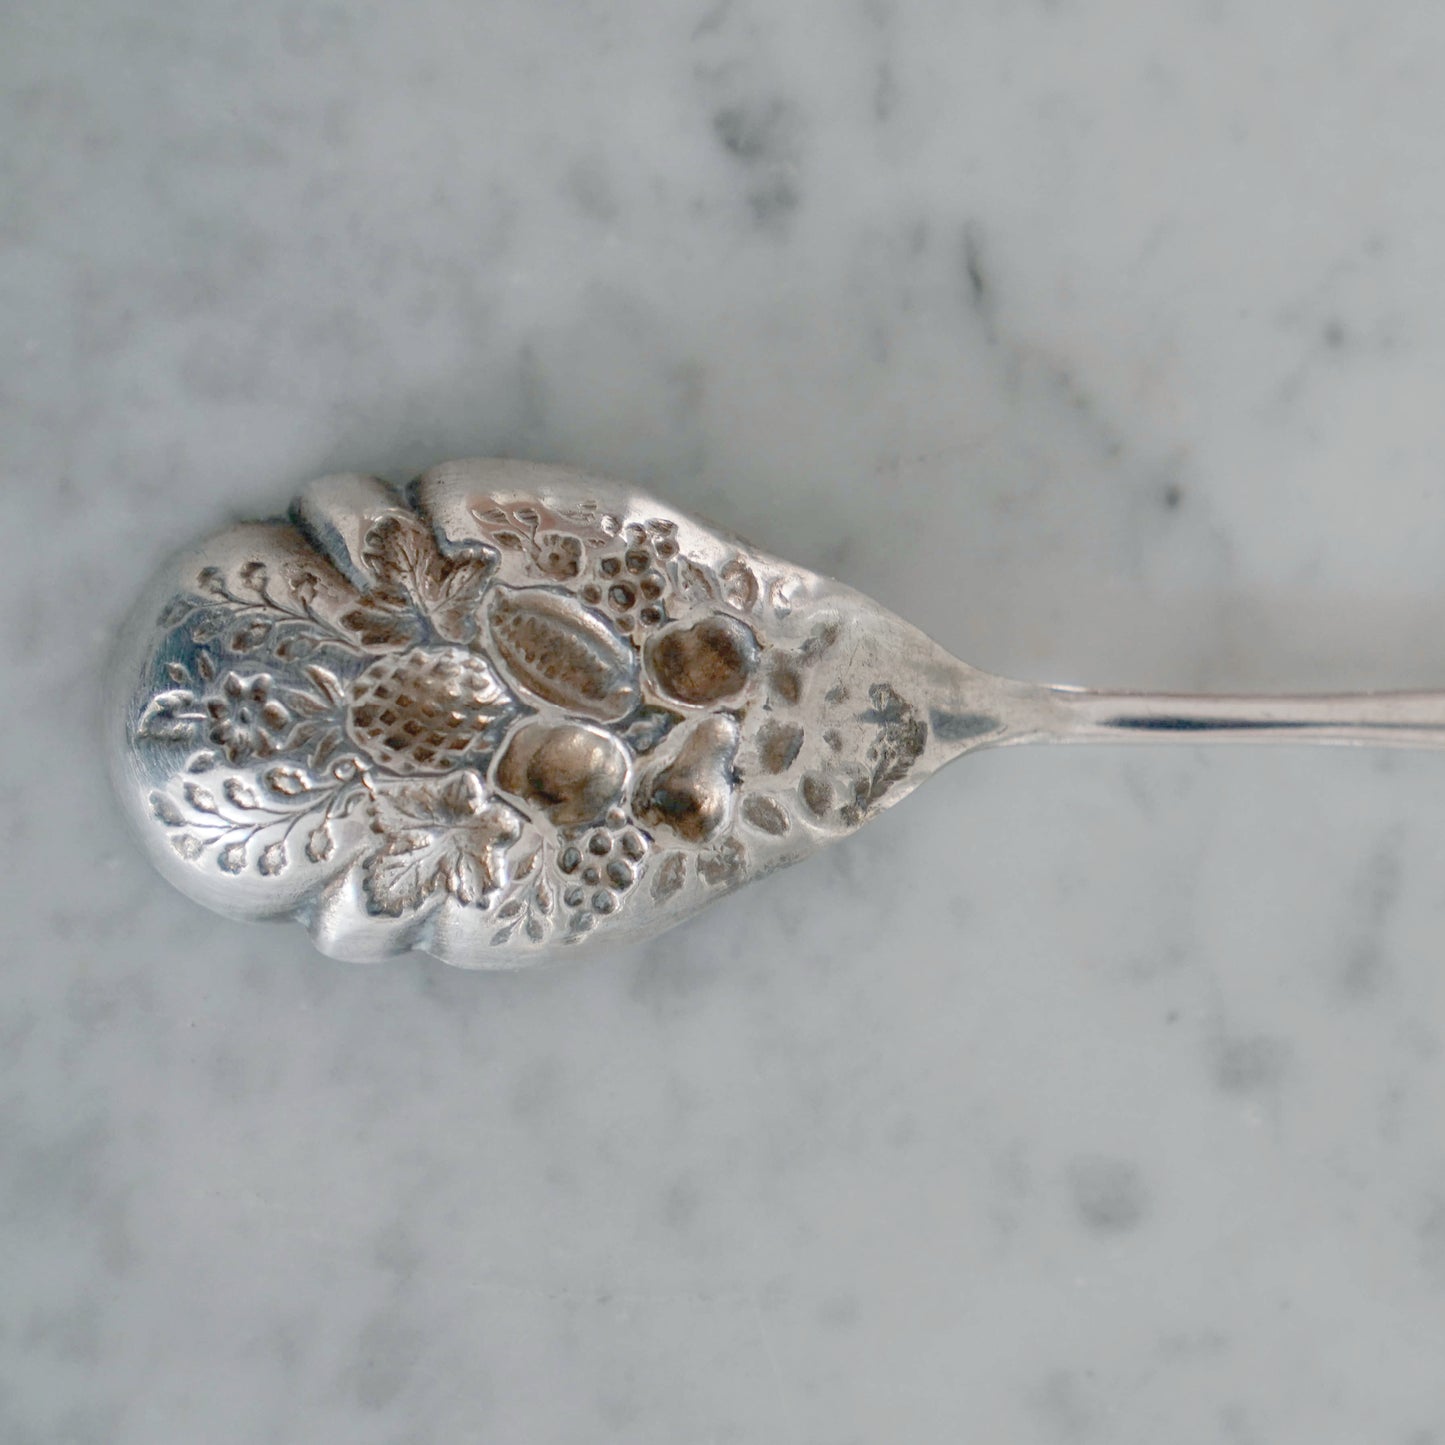 English antique silver-plated spoon, style 1